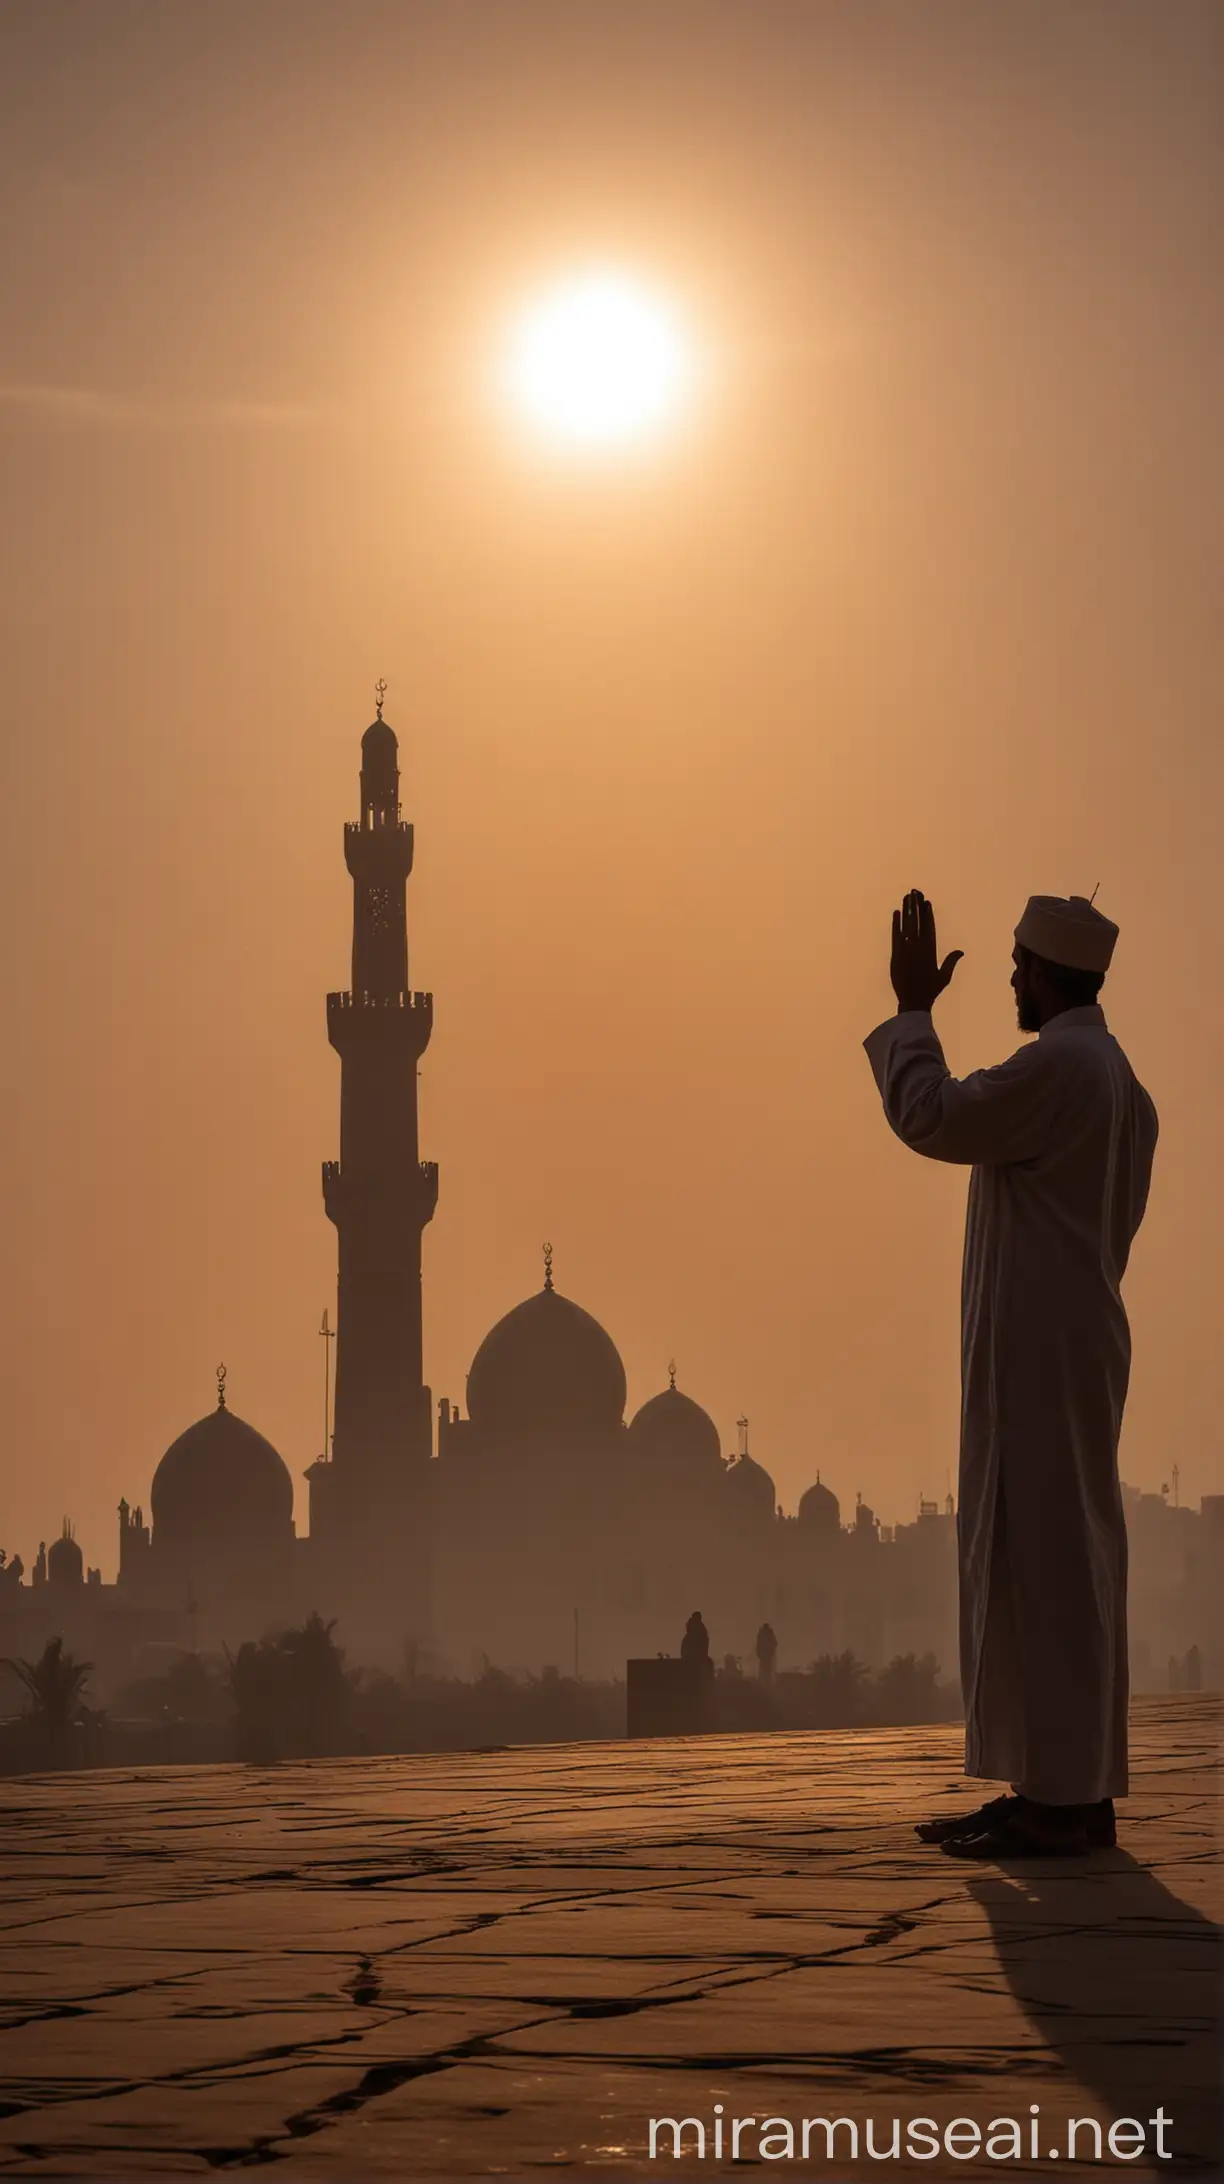 The Call to Prayer: Show a mosque with a minaret against the backdrop of a sunset, with the silhouette of a figure raising their hands in prayer, representing the adhan (call to prayer) without showing the face of the Prophet.
